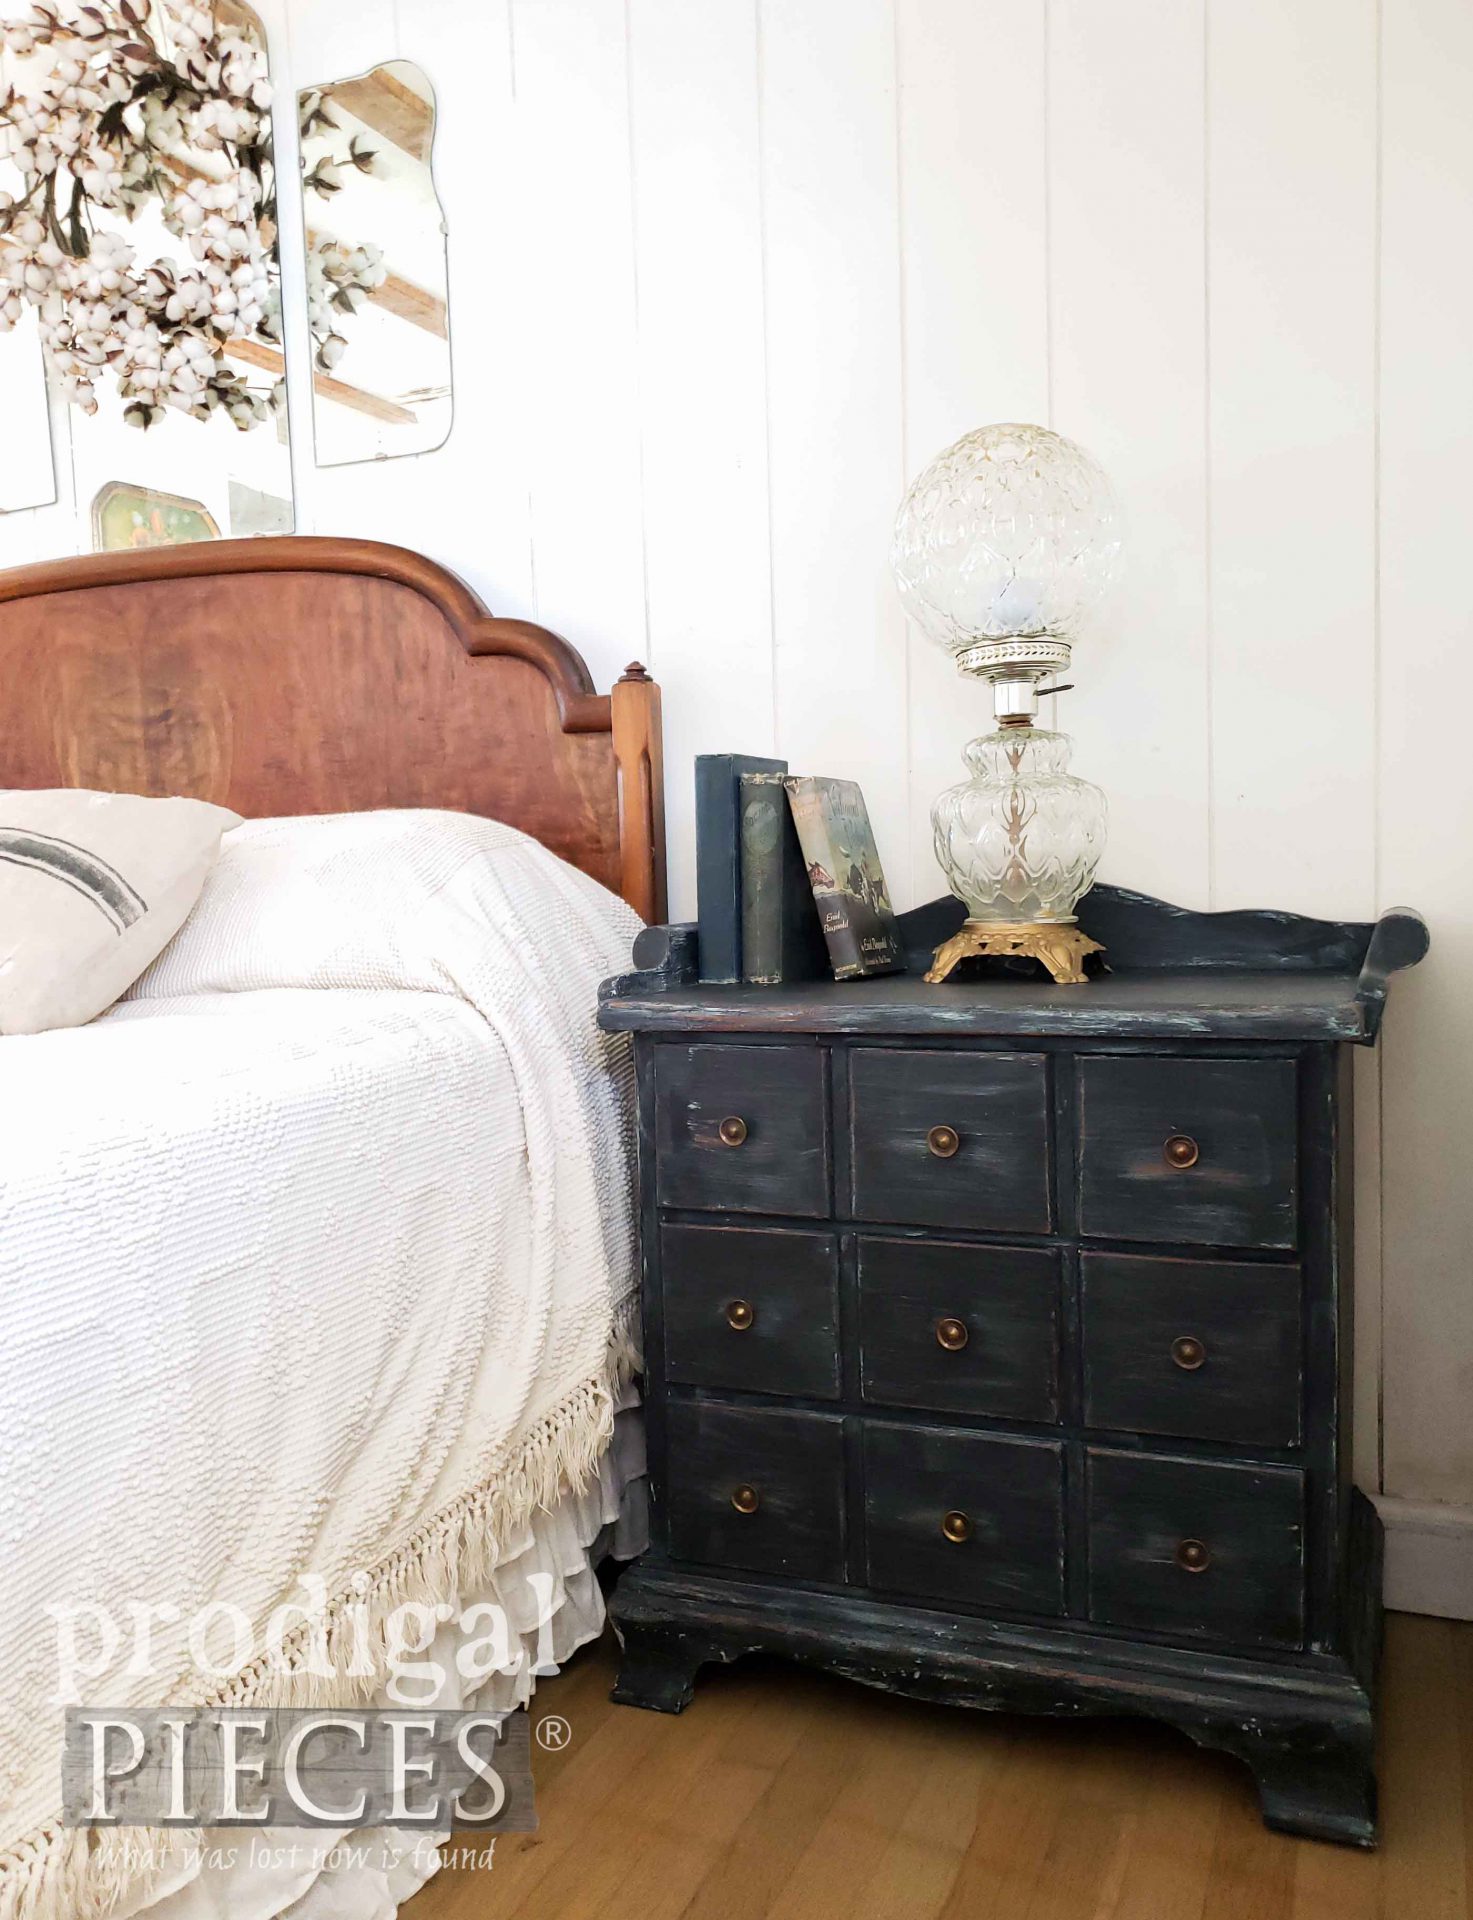 Simple Farmhouse Bedroom Decor with Farmhouse Nightstand by Larissa of Prodigal Pieces | prodigalpieces.com #prodigalpieces #bedroom #farmhouse #home #homedecor